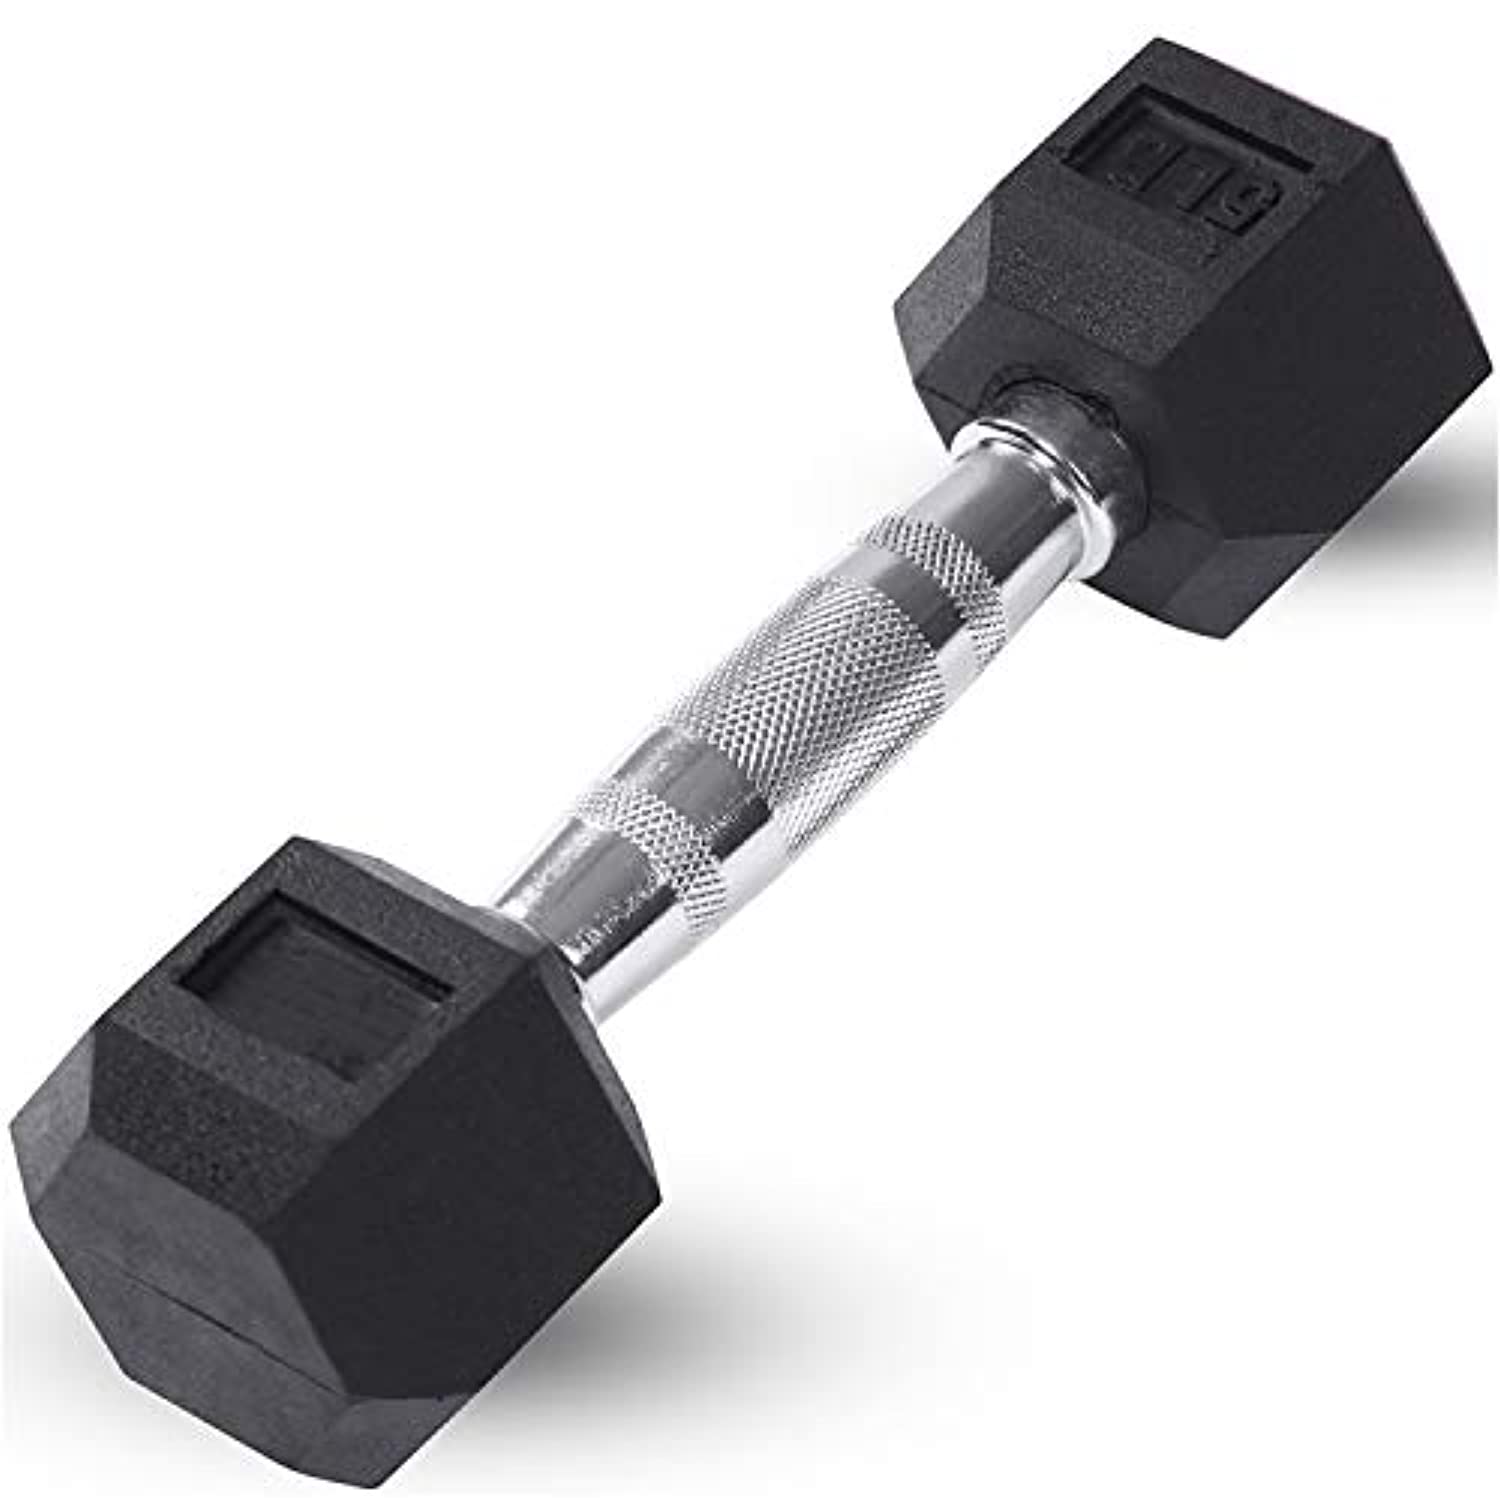 JFIT Rubber Hex Dumbbell 5 LB Single - Hex Shaped Heads to Prevent Rolling and Injury - Ergonomic Hand Weights for Exercise, Therapy, Building Muscle, Strength and Weight Training